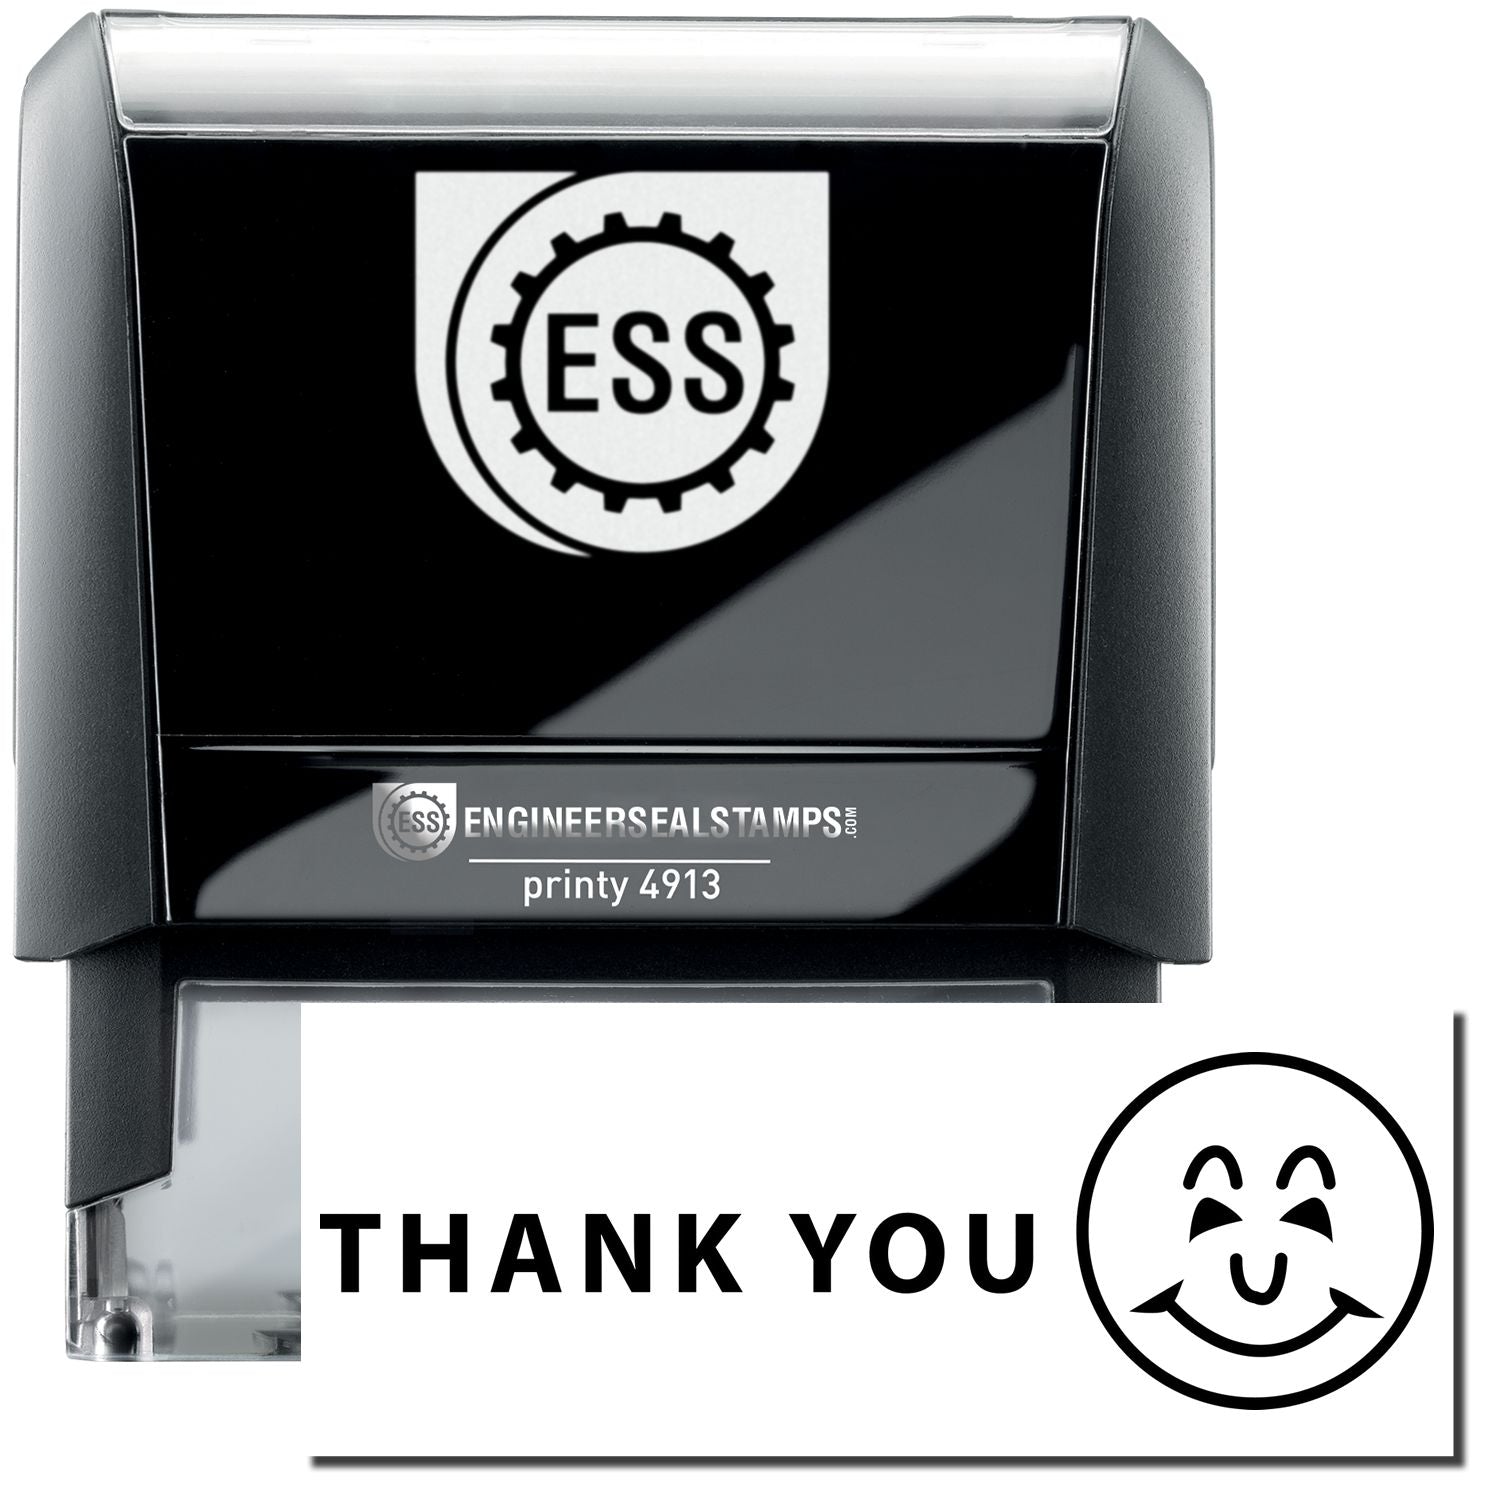 A self-inking stamp with a stamped image showing how the text "THANK YOU" in a large font with an image of a Smiley face on the right side is displayed after stamping.